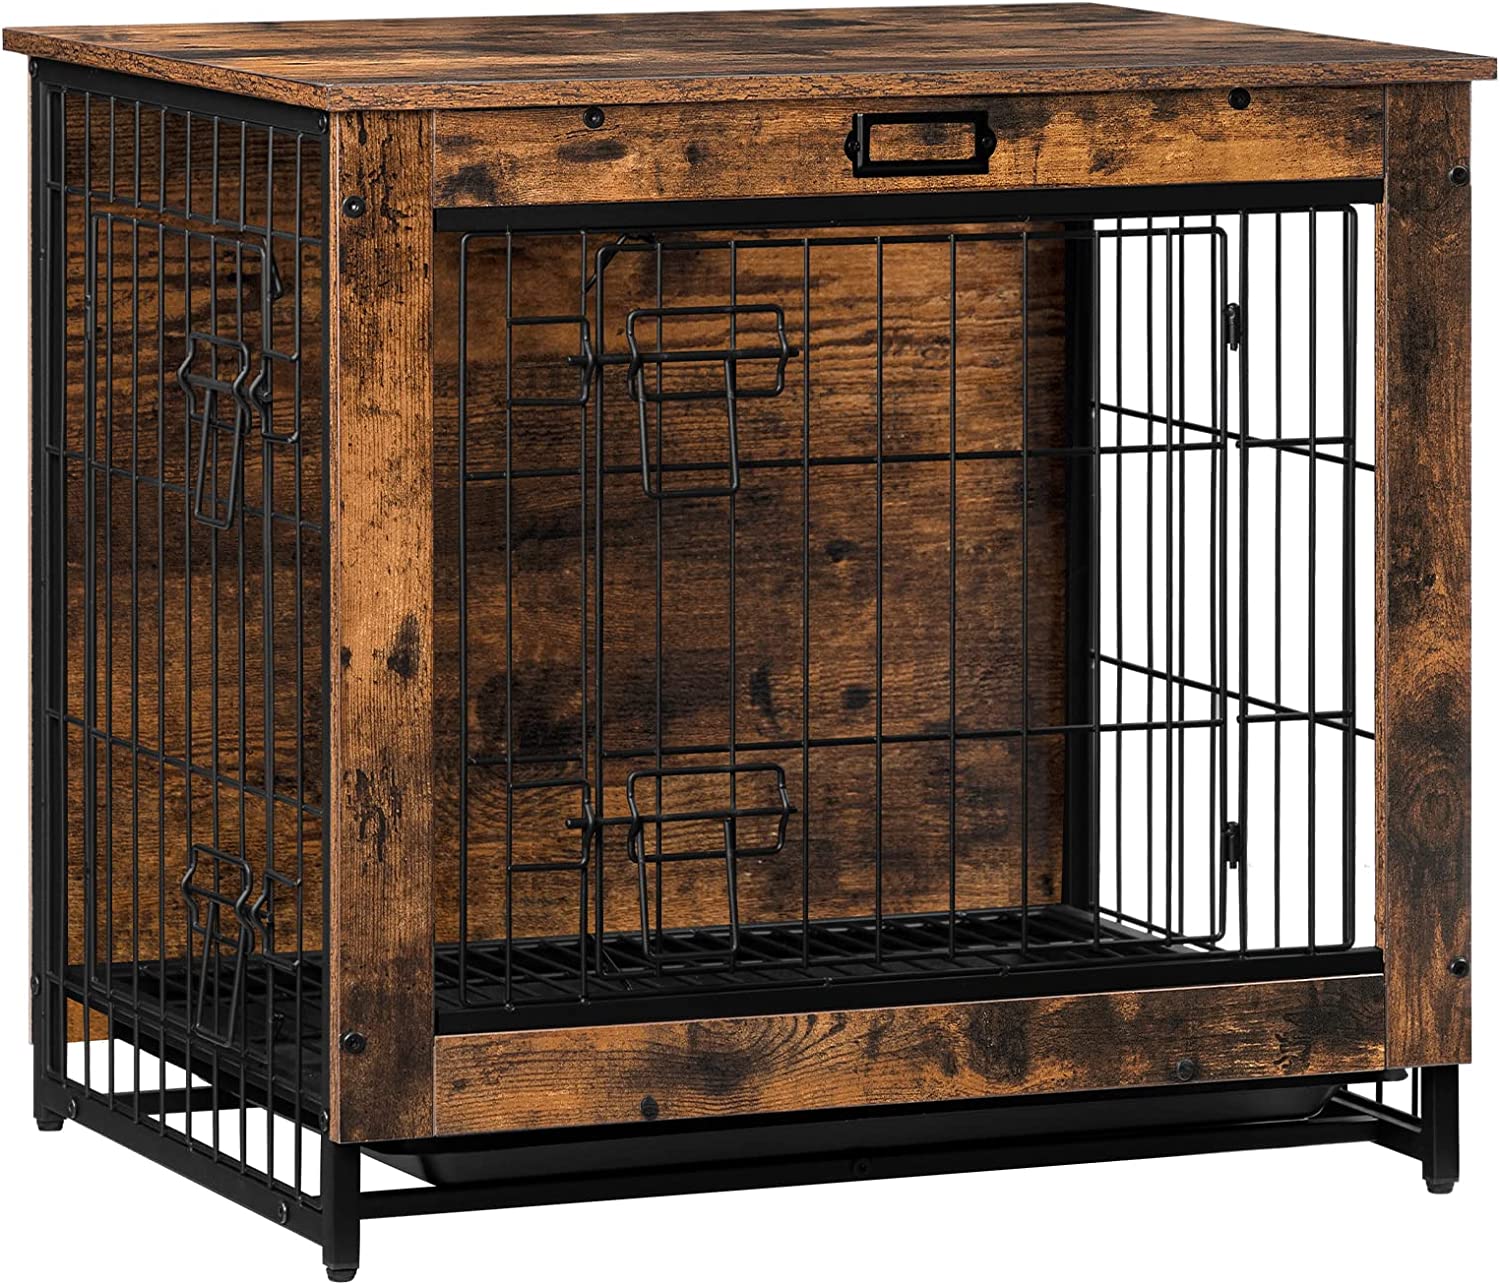 Dog Crate Furniture, Decorative Dog Kennel, Wooden Pet Furniture with Pull-Out Tray